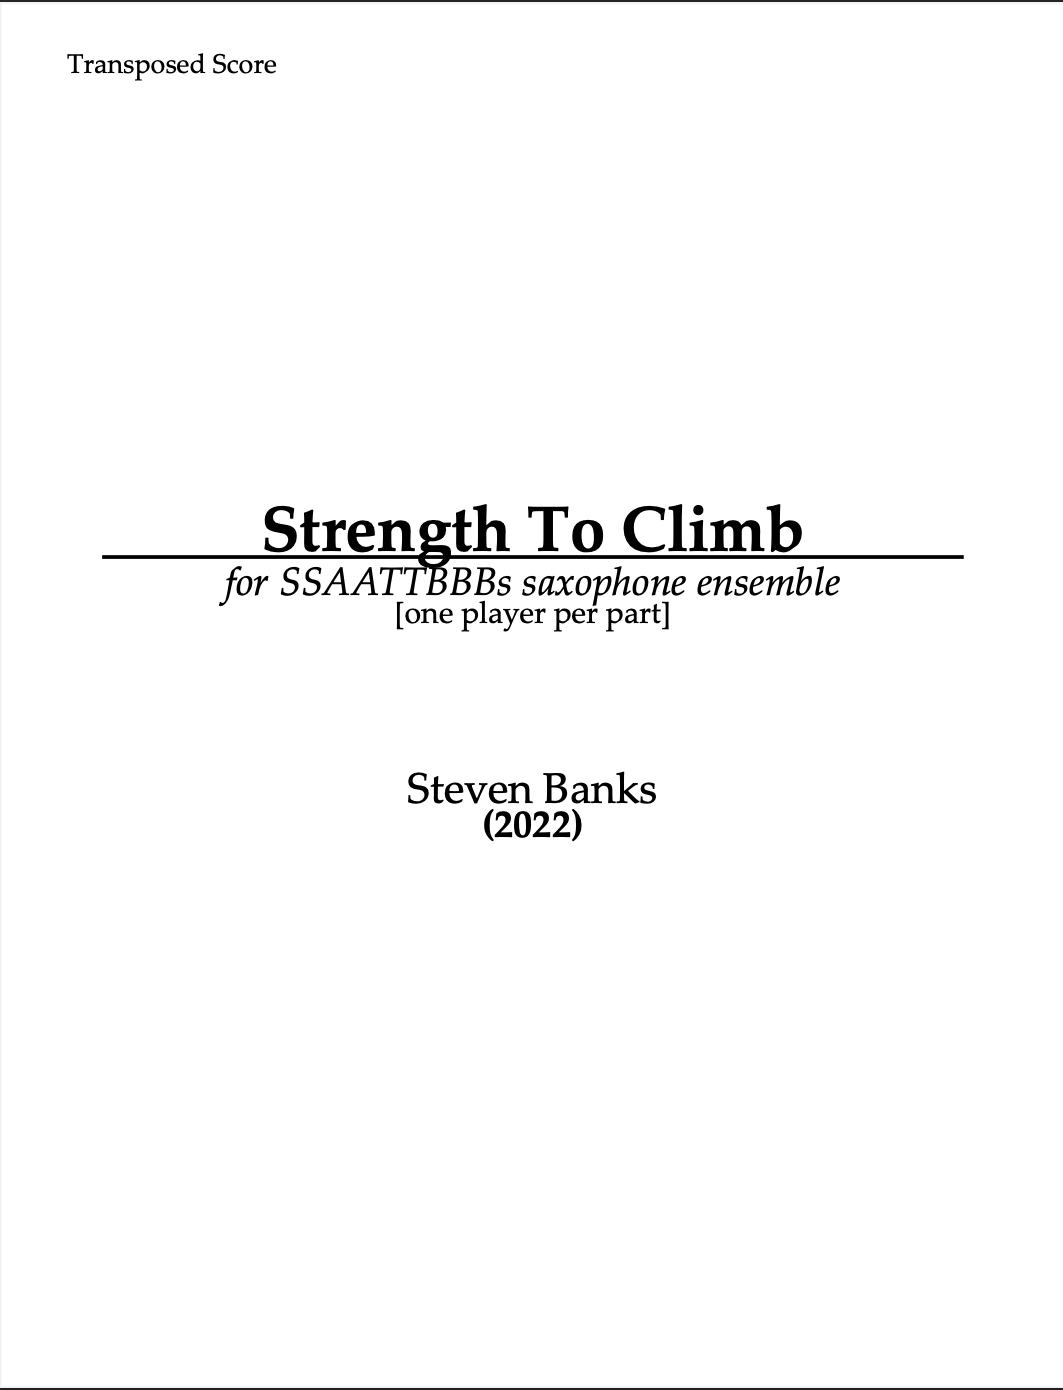 Strength To Climb by Steven Banks